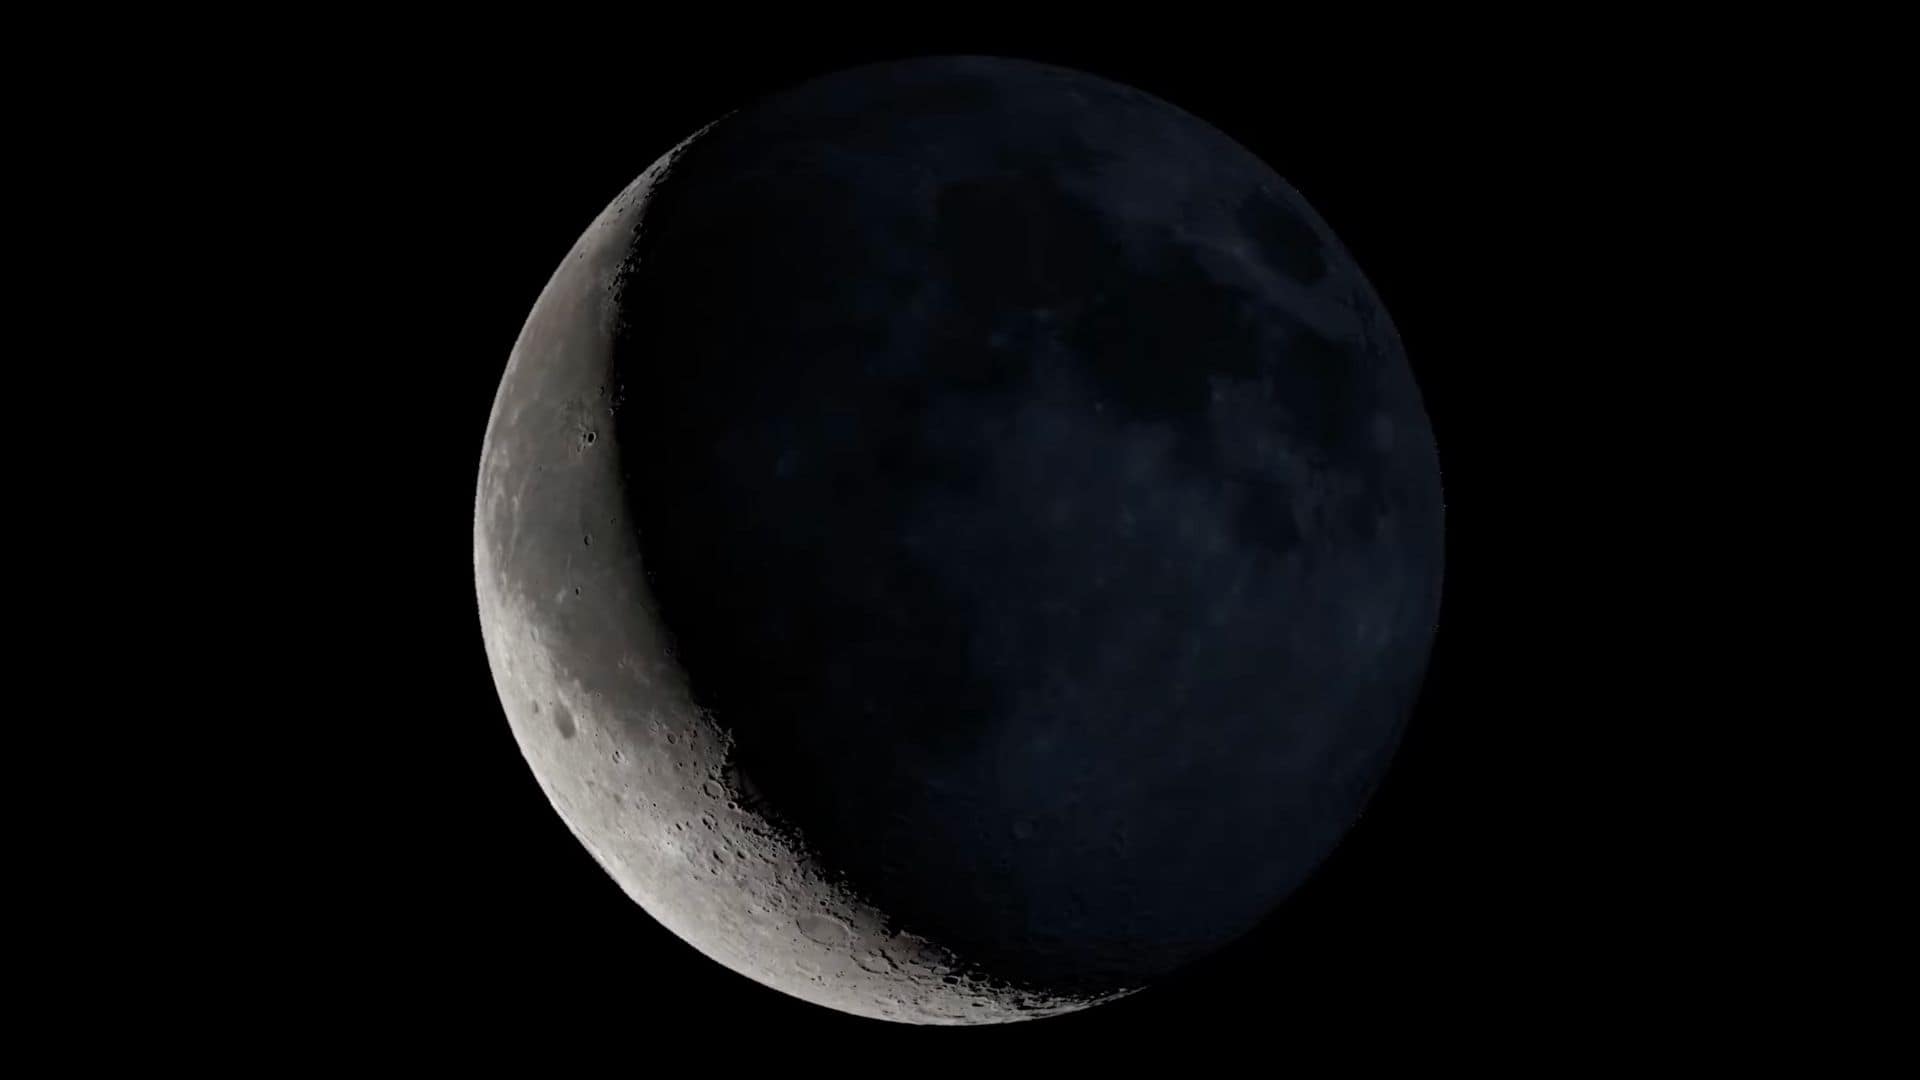 A waning crescent moon starts right after the third quarter moon and lasts until it becomes a new moon